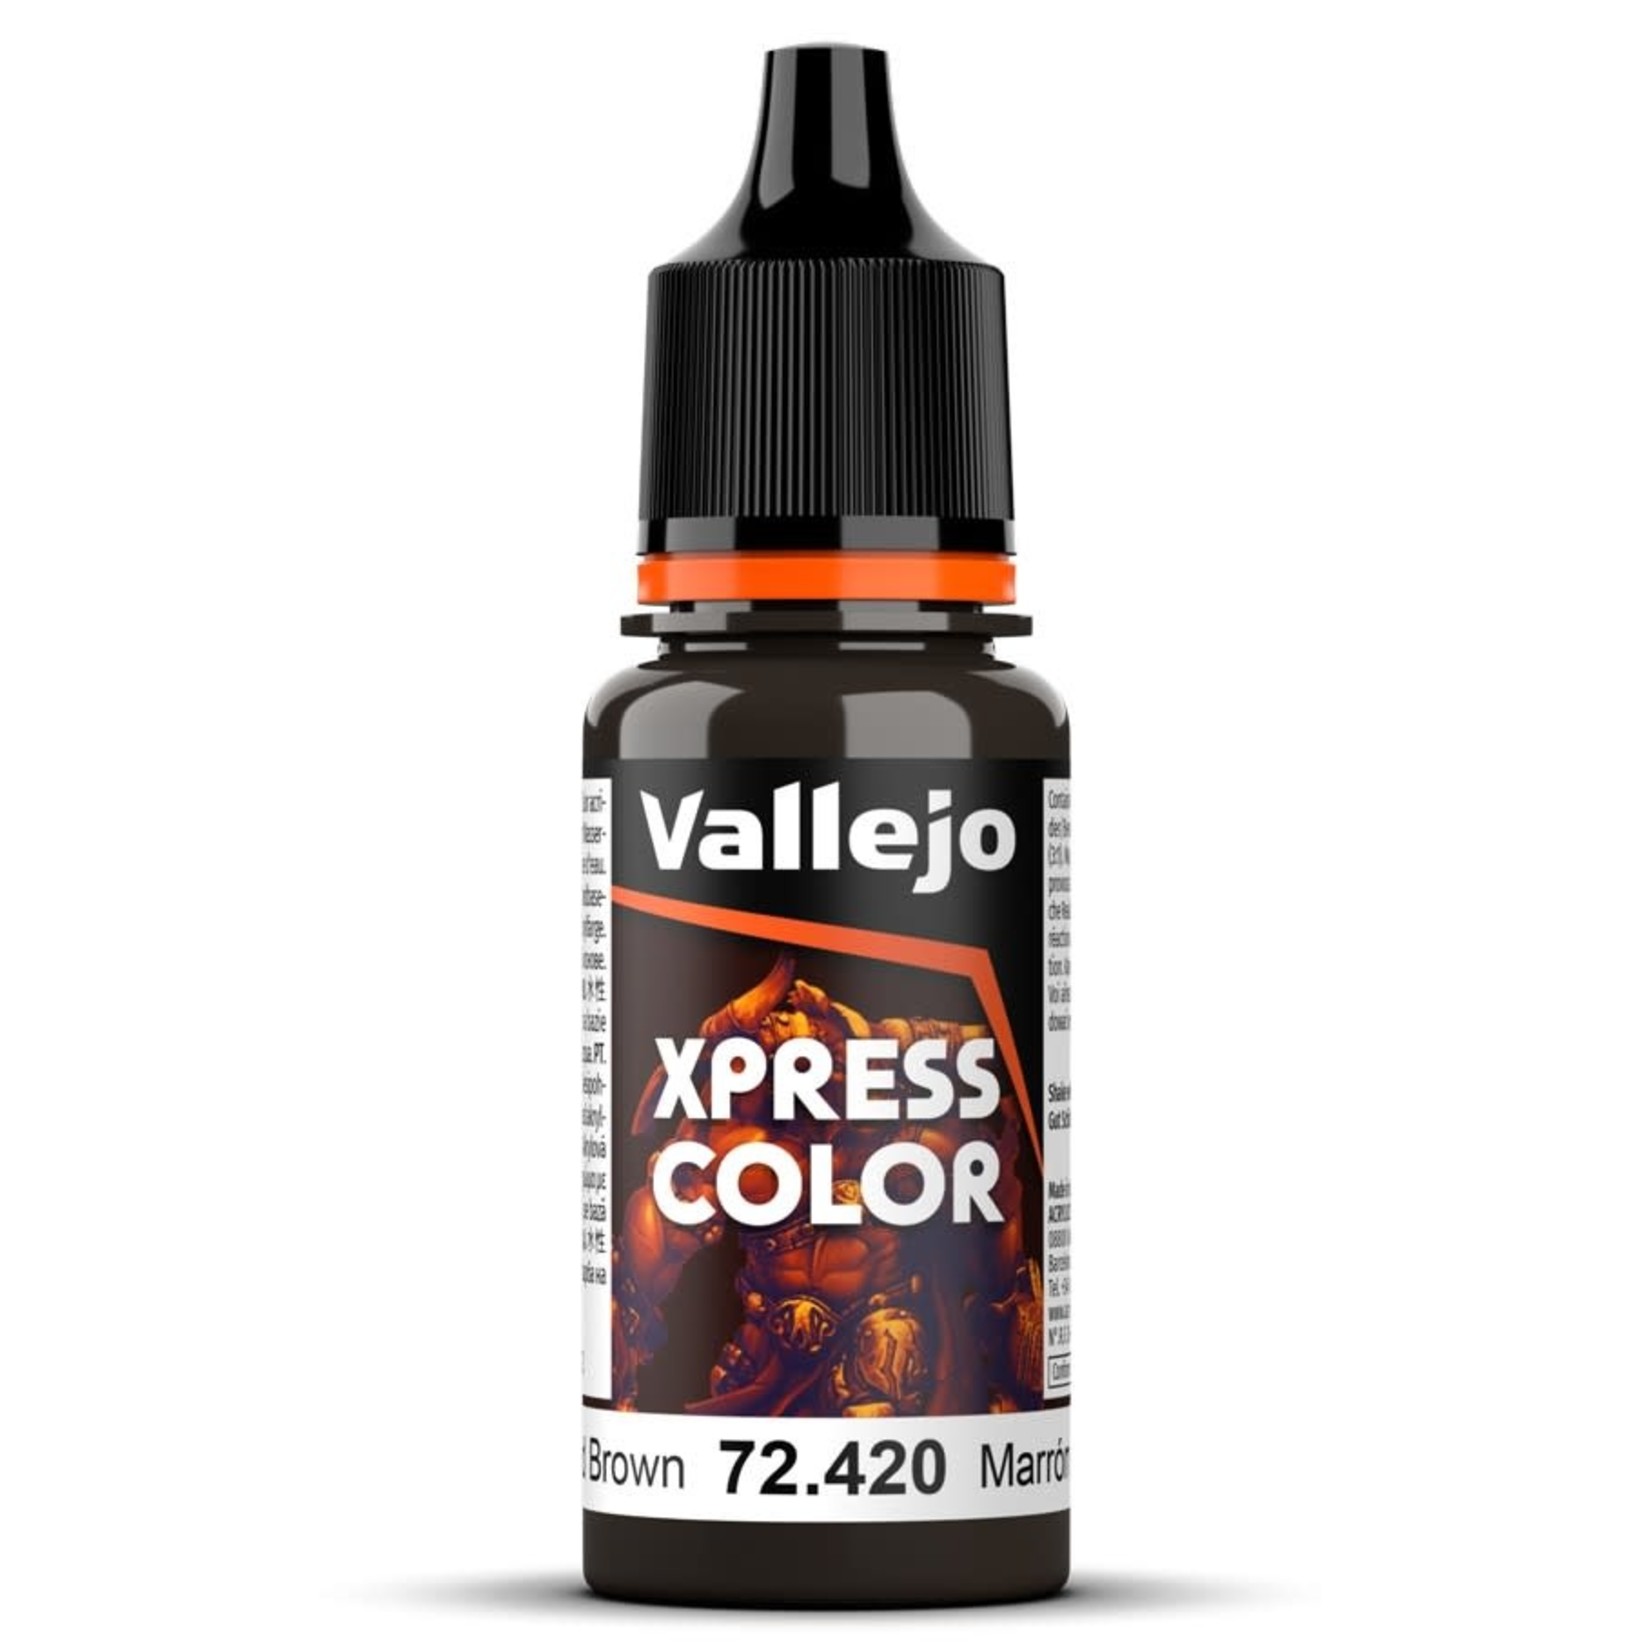 Vallejo Paint: Xpress (Wasteland Brown)